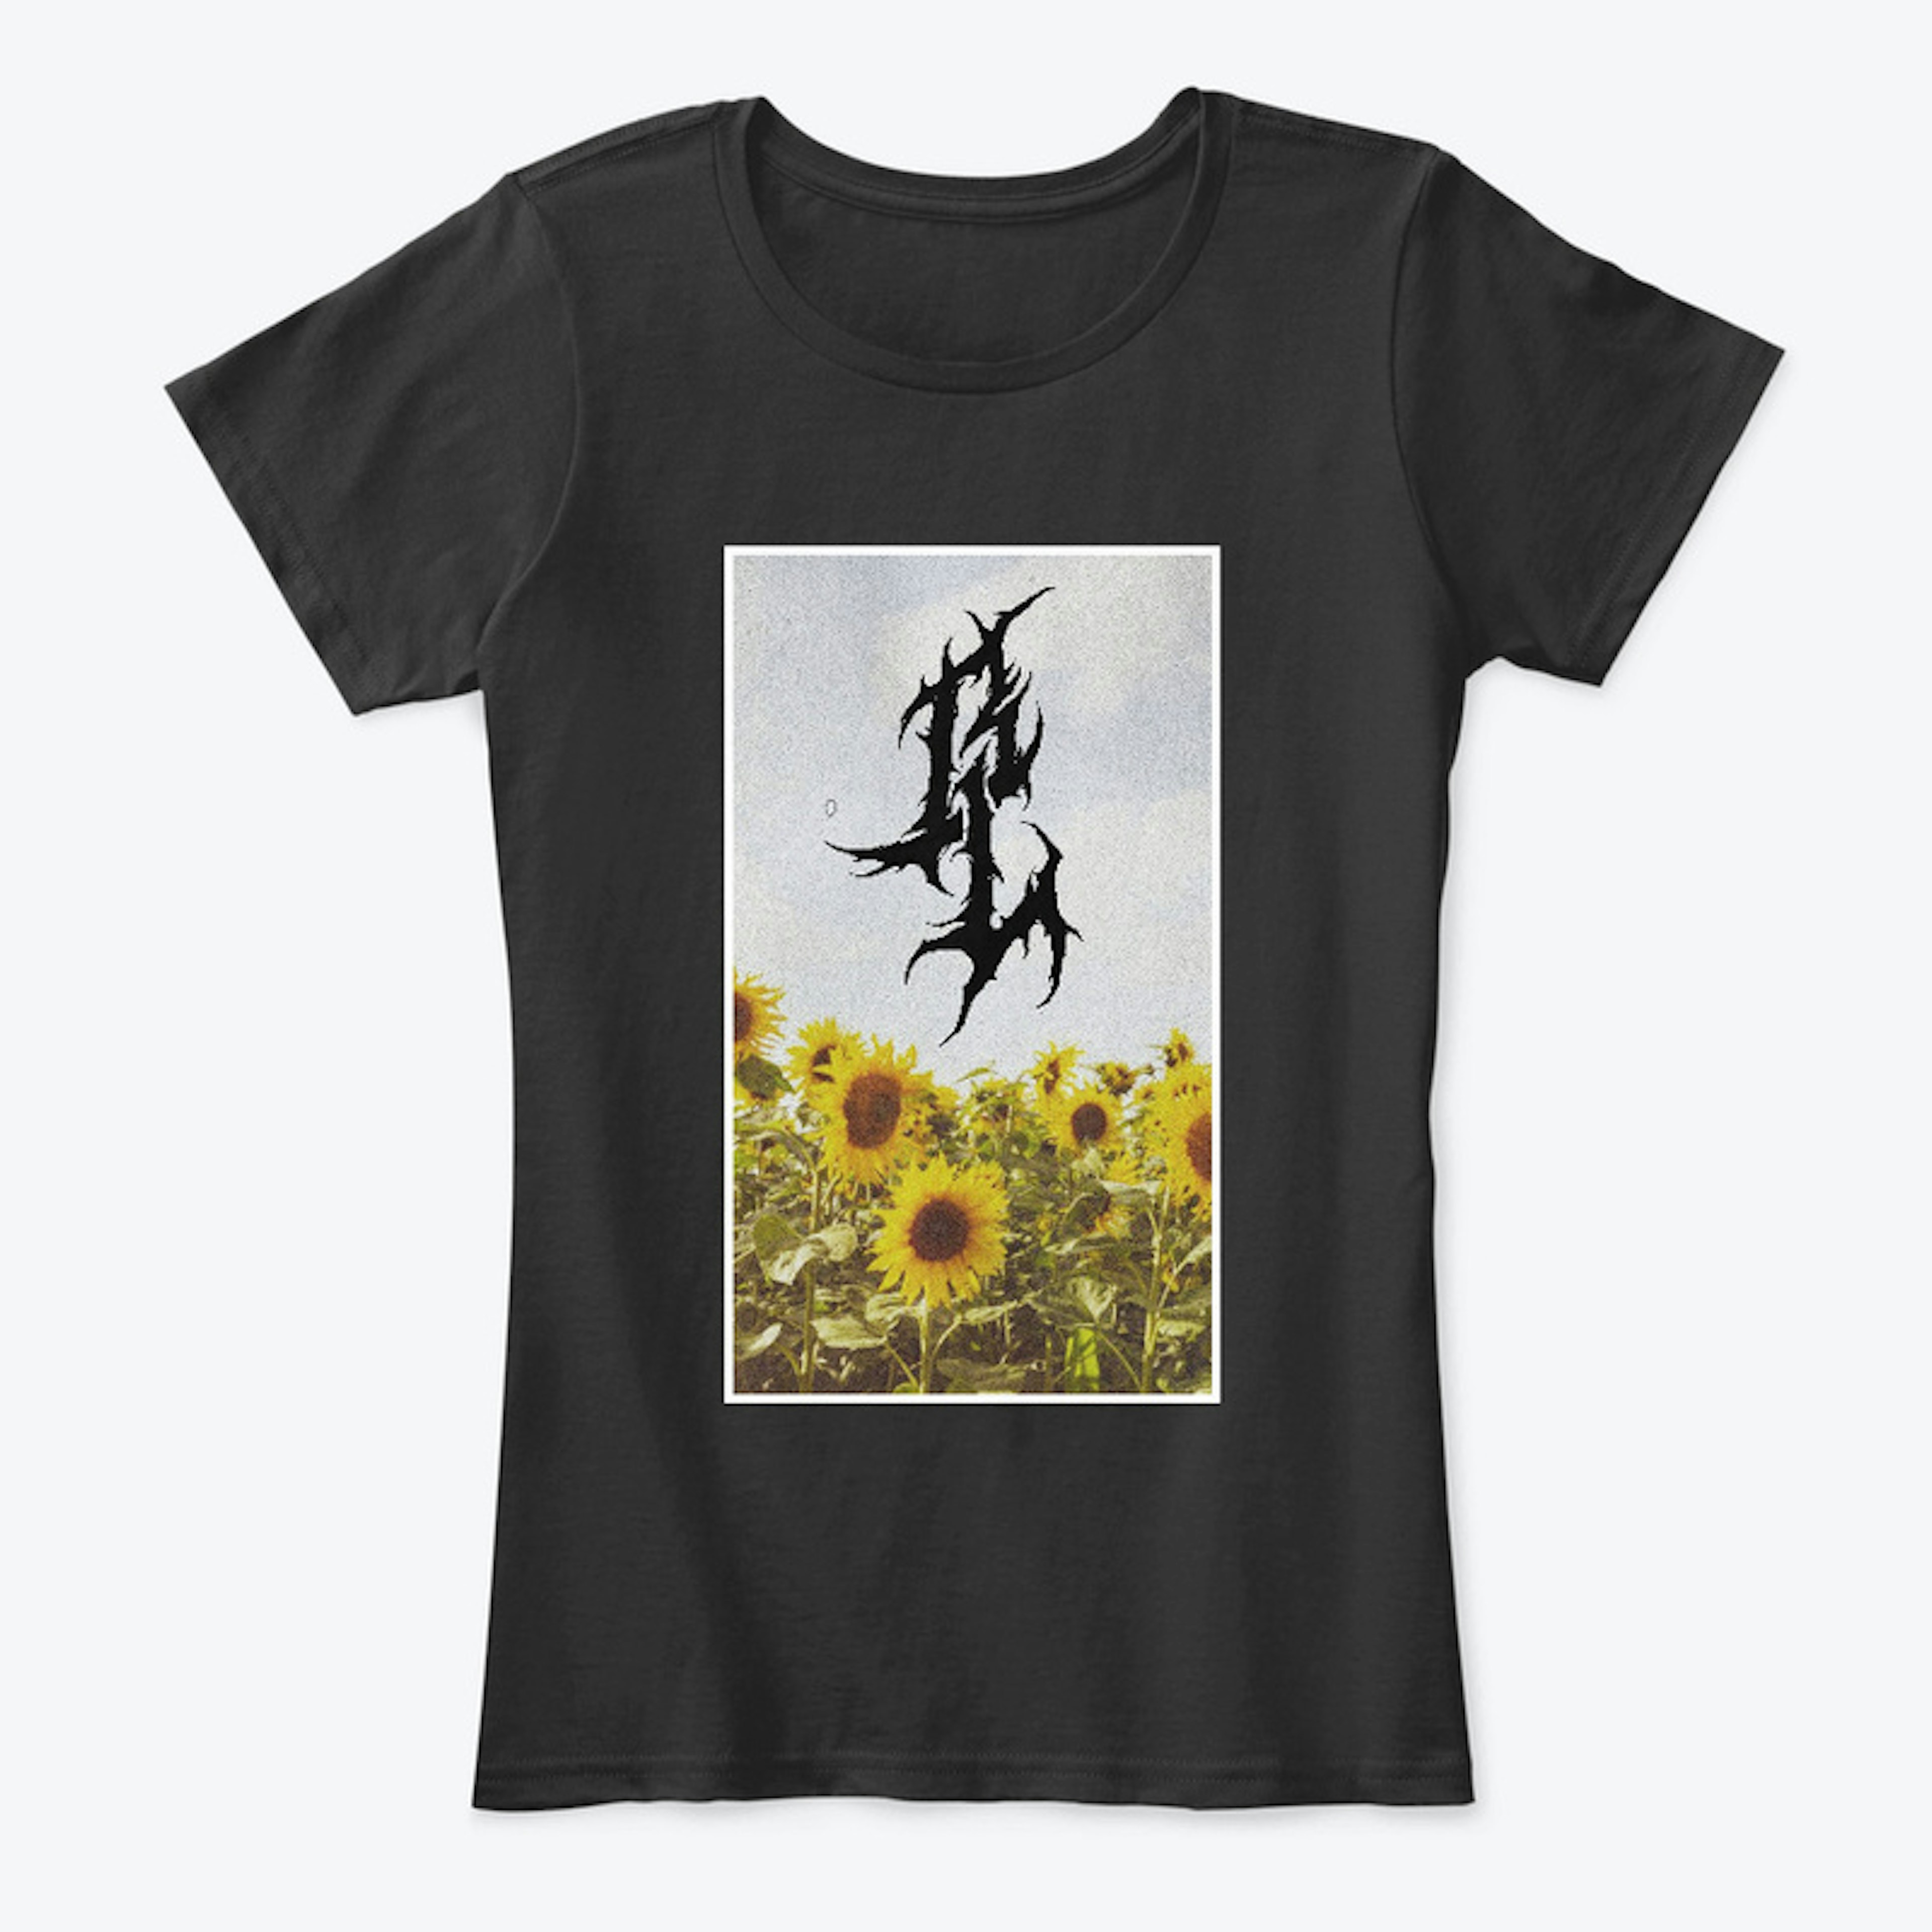 Betwixt Lungs - Sunflowers and Logo